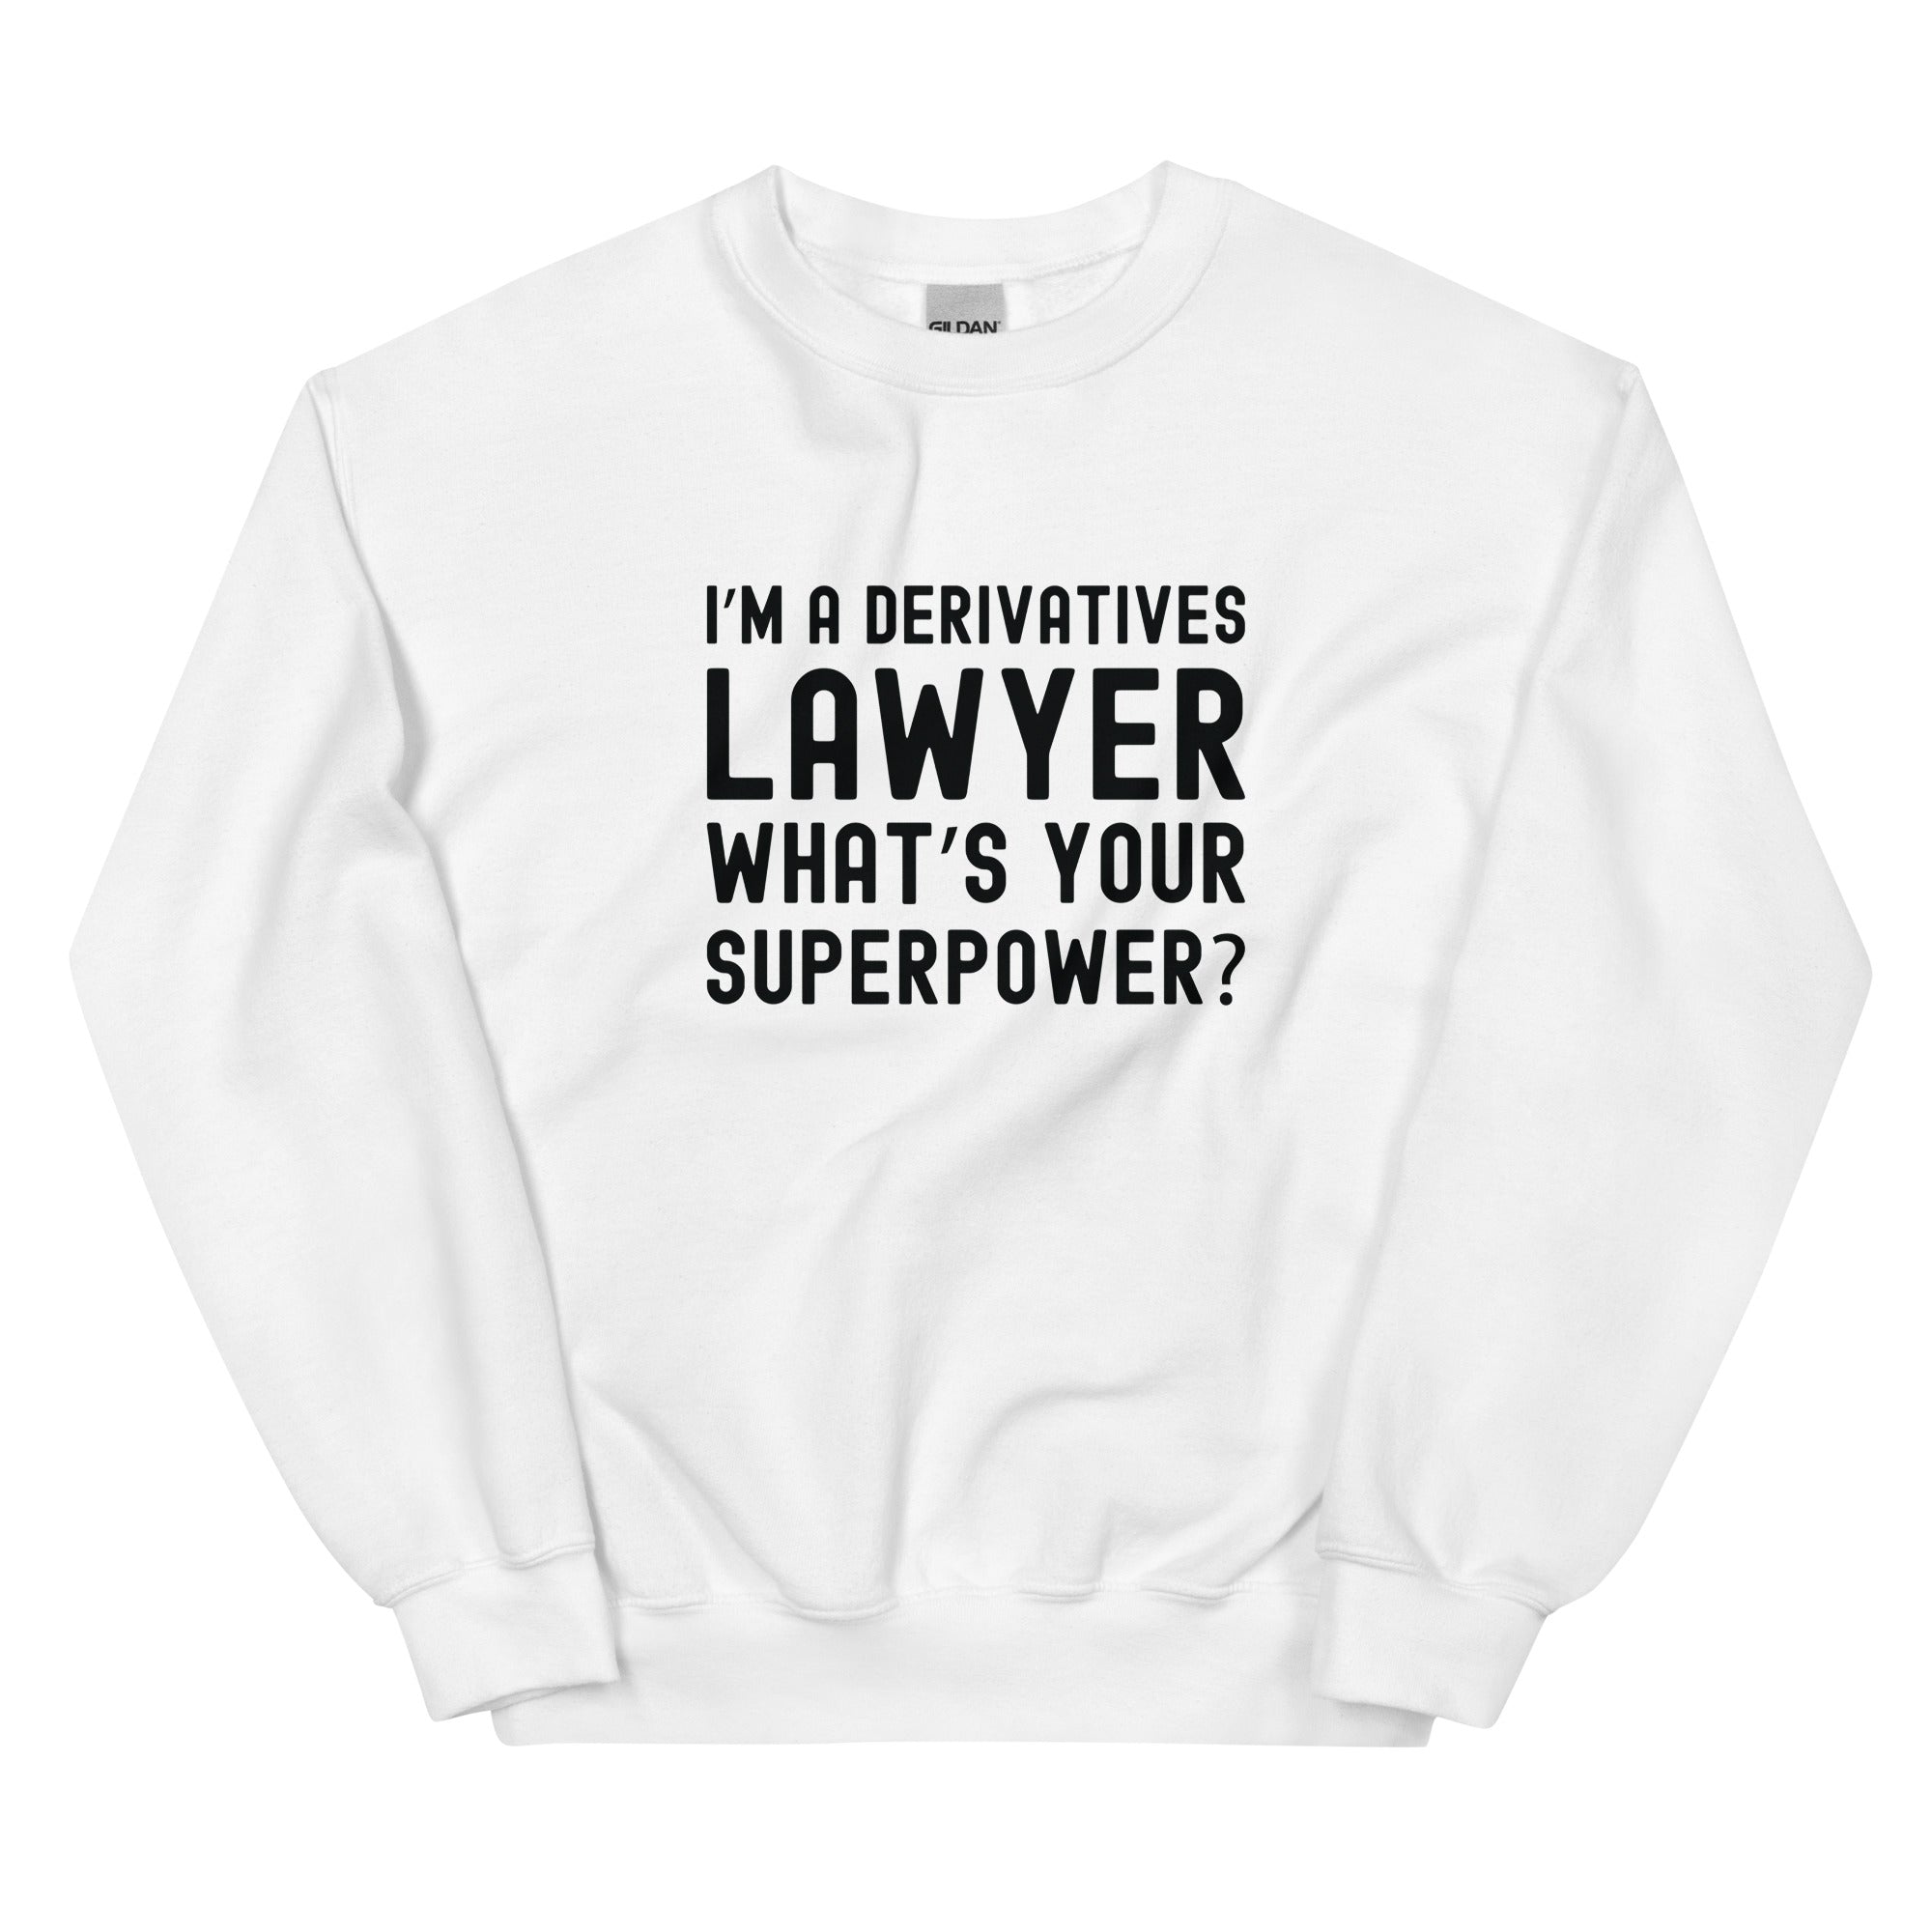 Unisex Sweatshirt | I’m a derivatives lawyer, what’s your superpower?